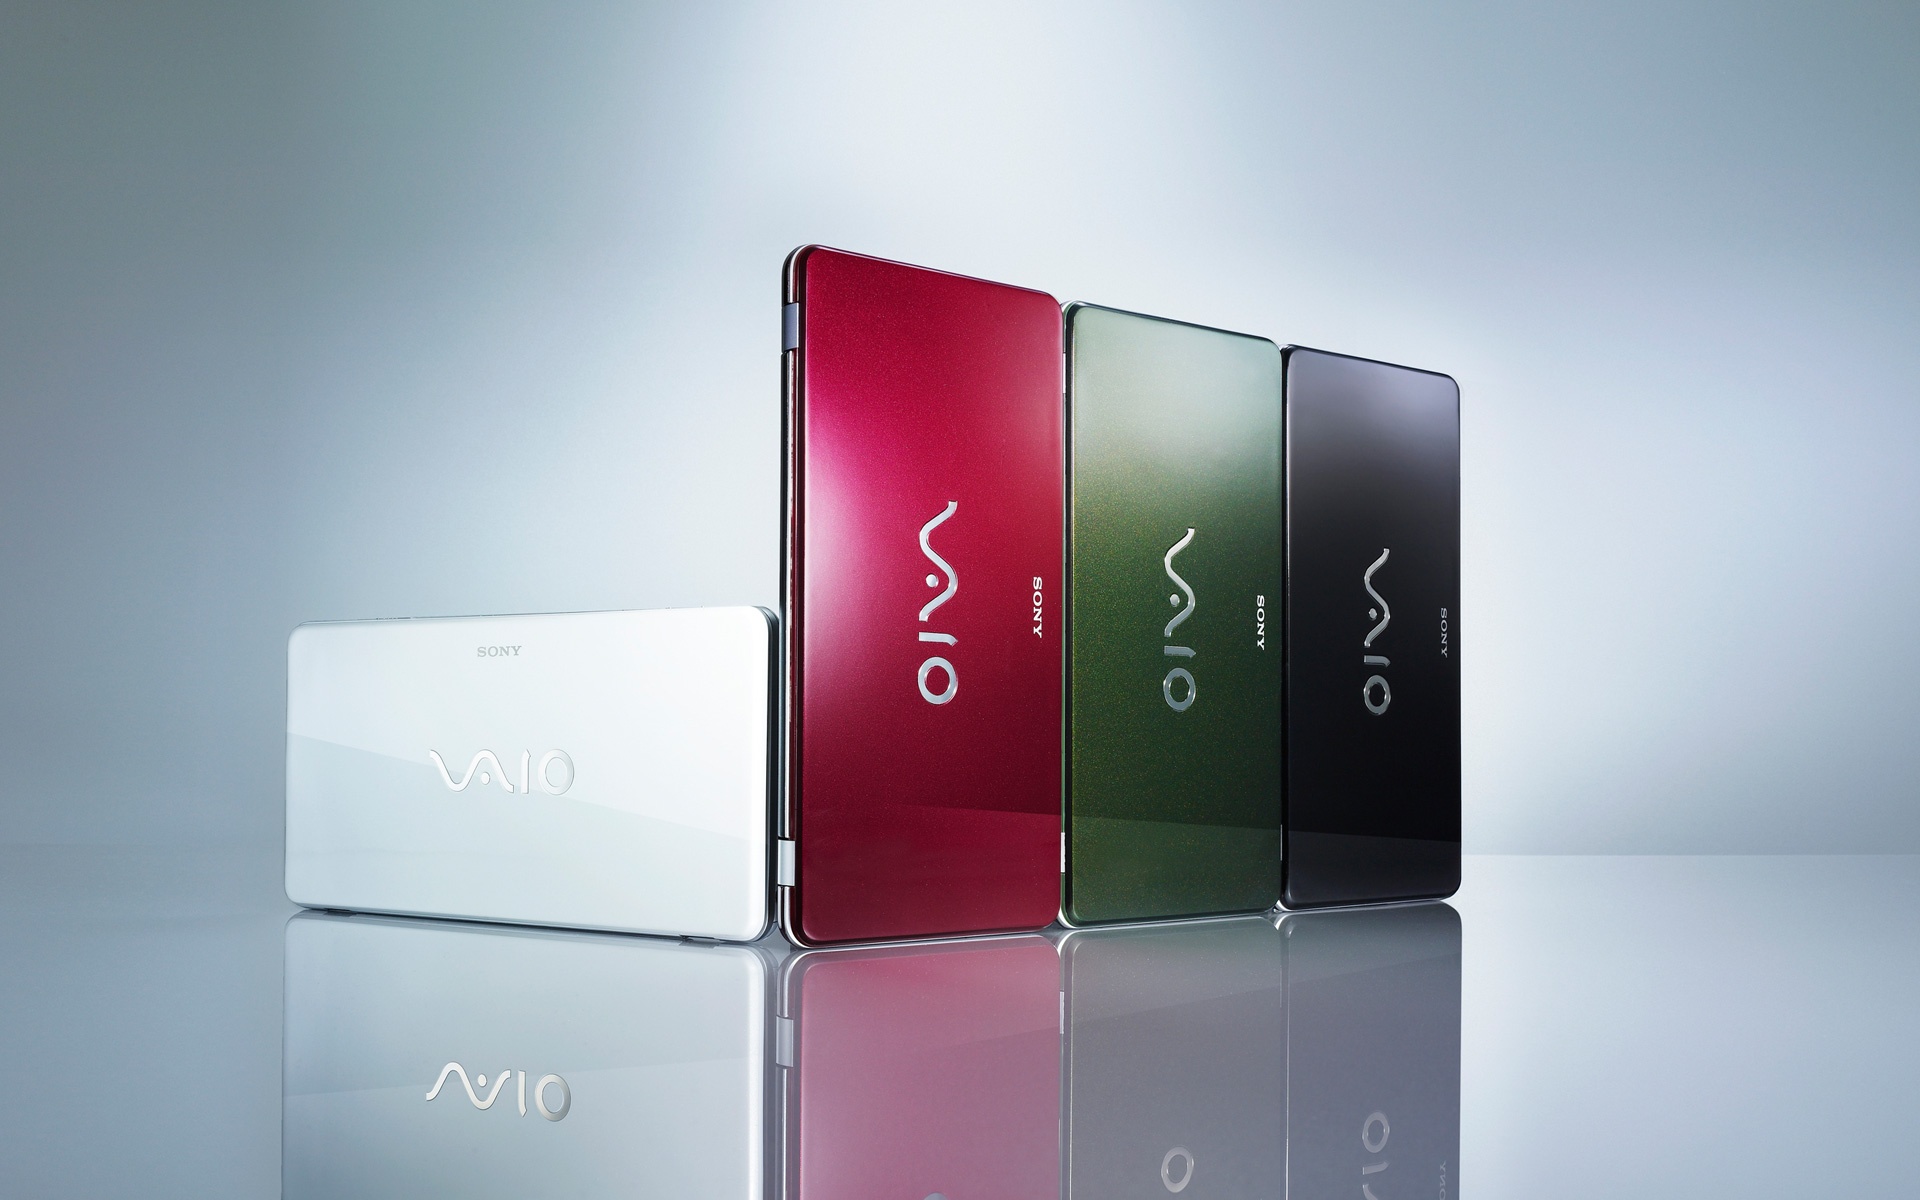 Vaio HD download for free